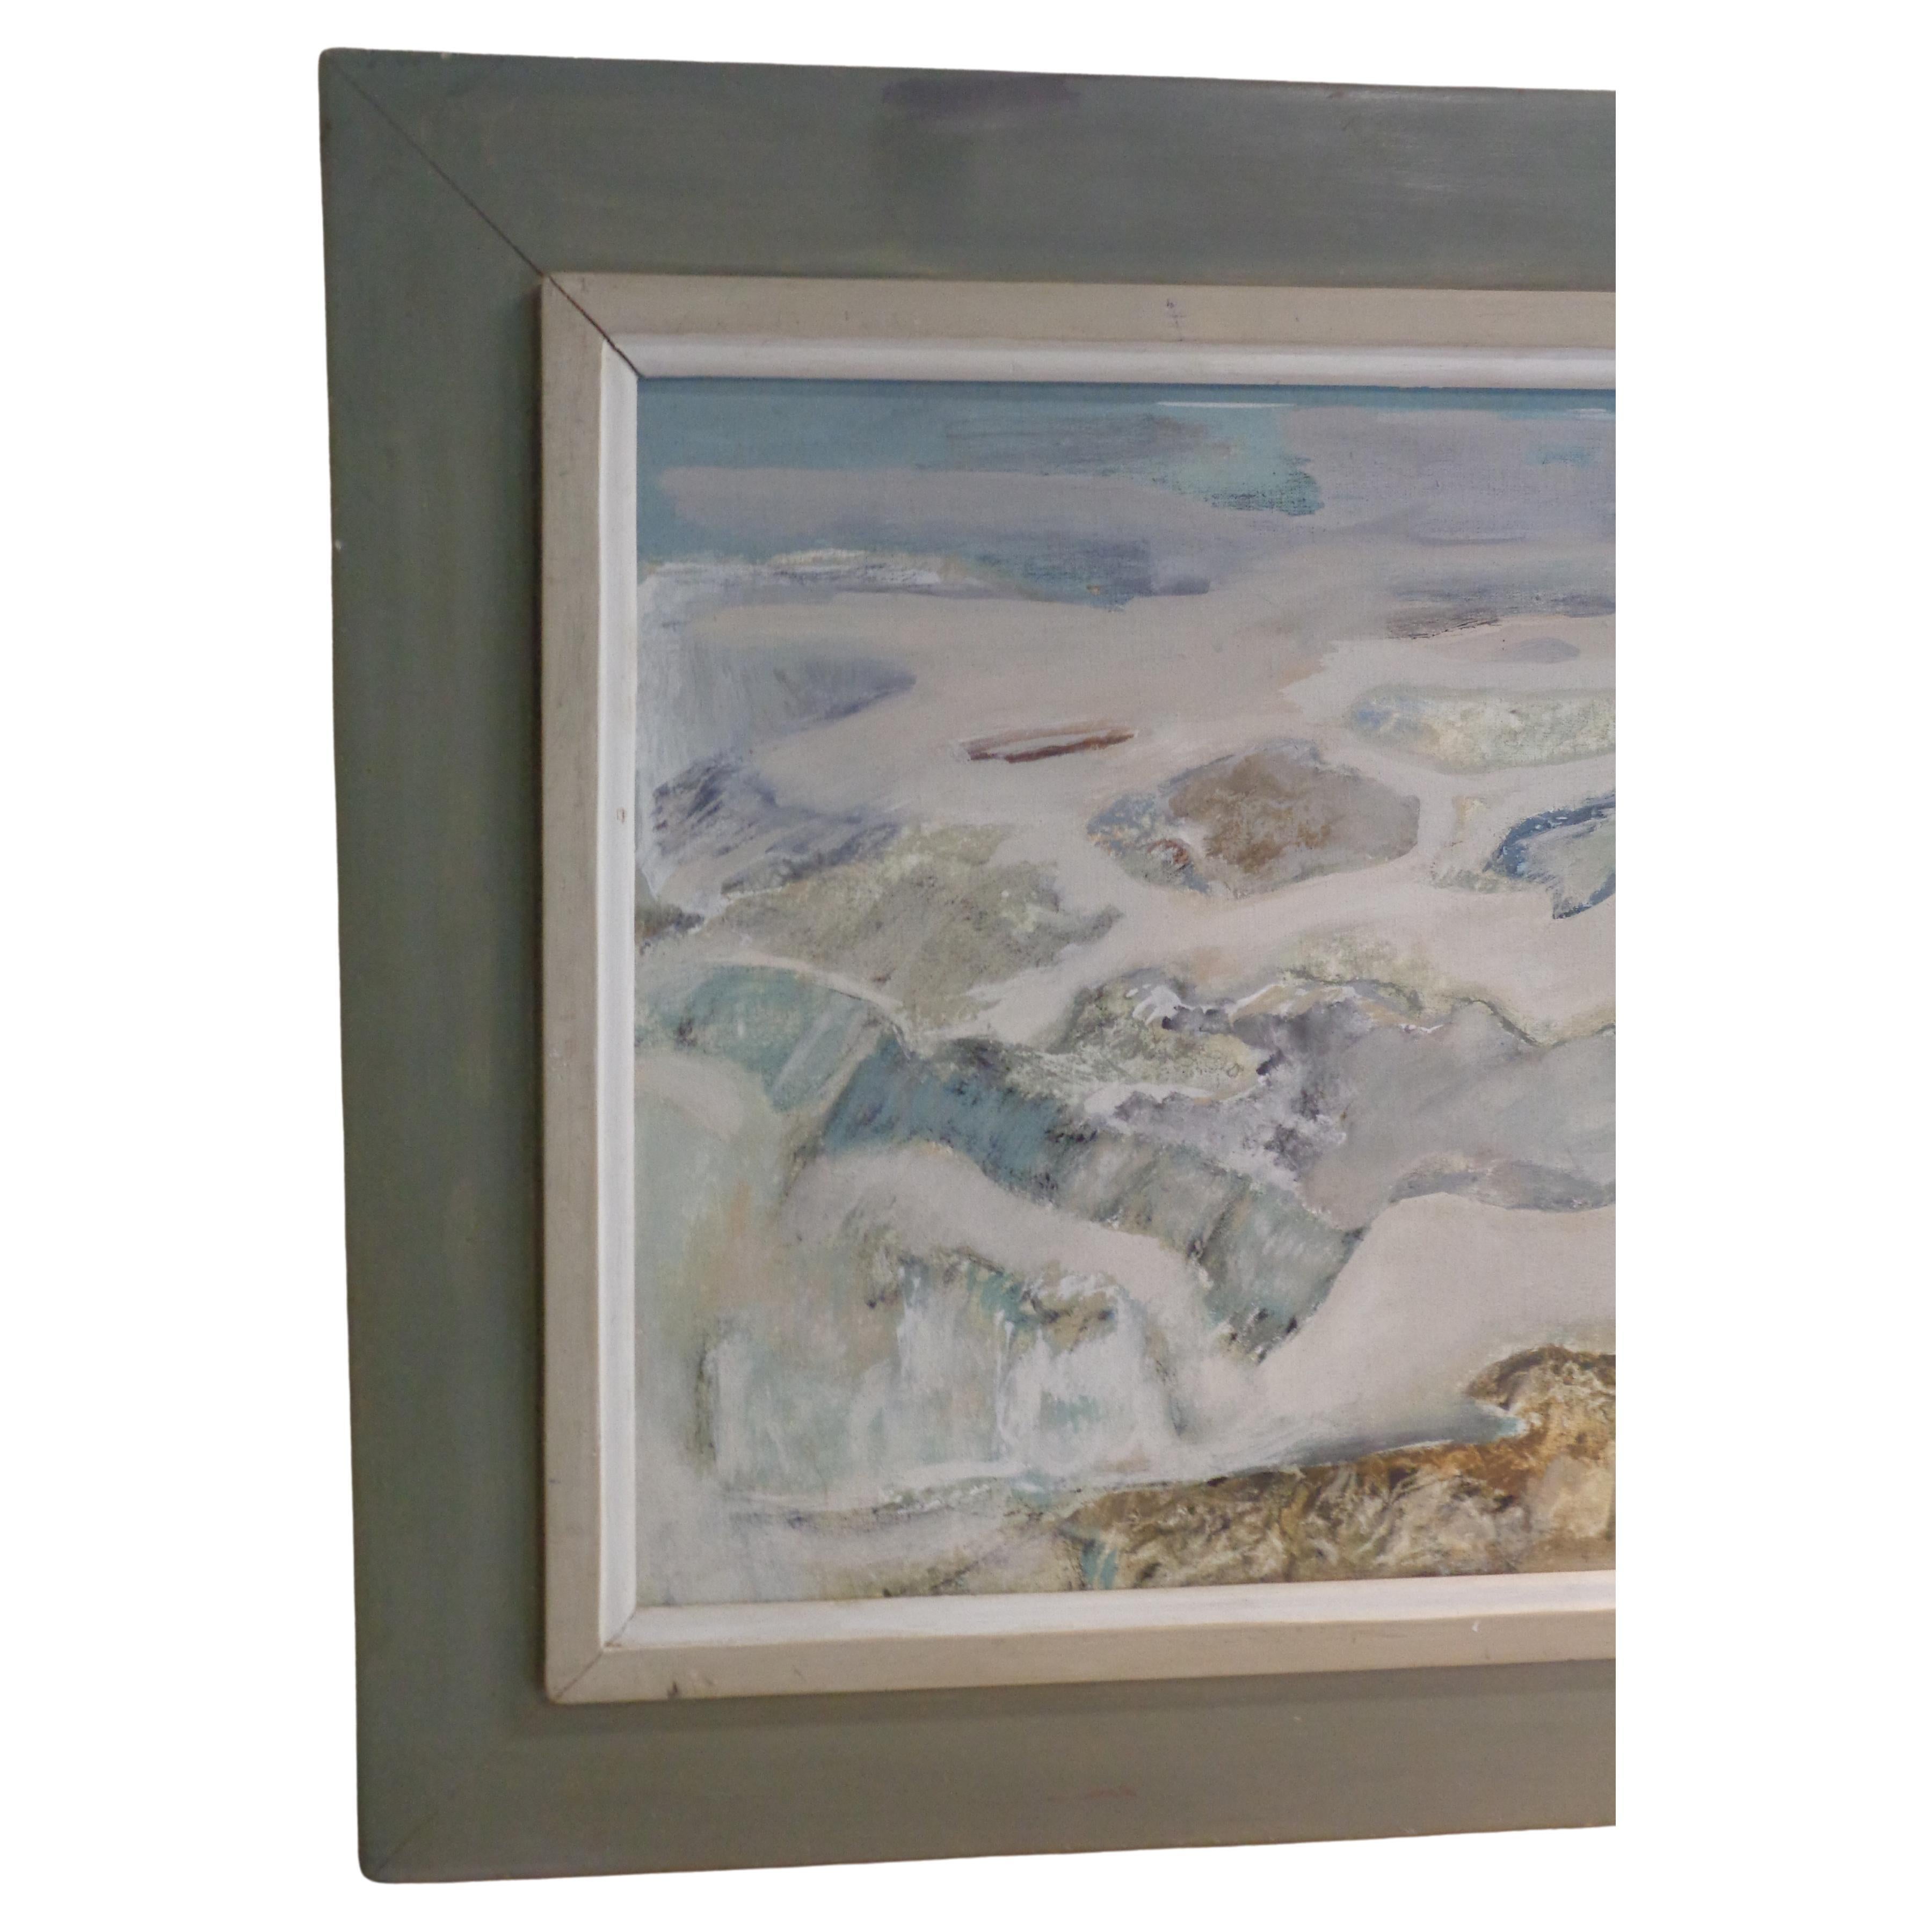 Late 20th Century American Impressionist Beach Scene Oil Painting on Board in Original Frame For Sale